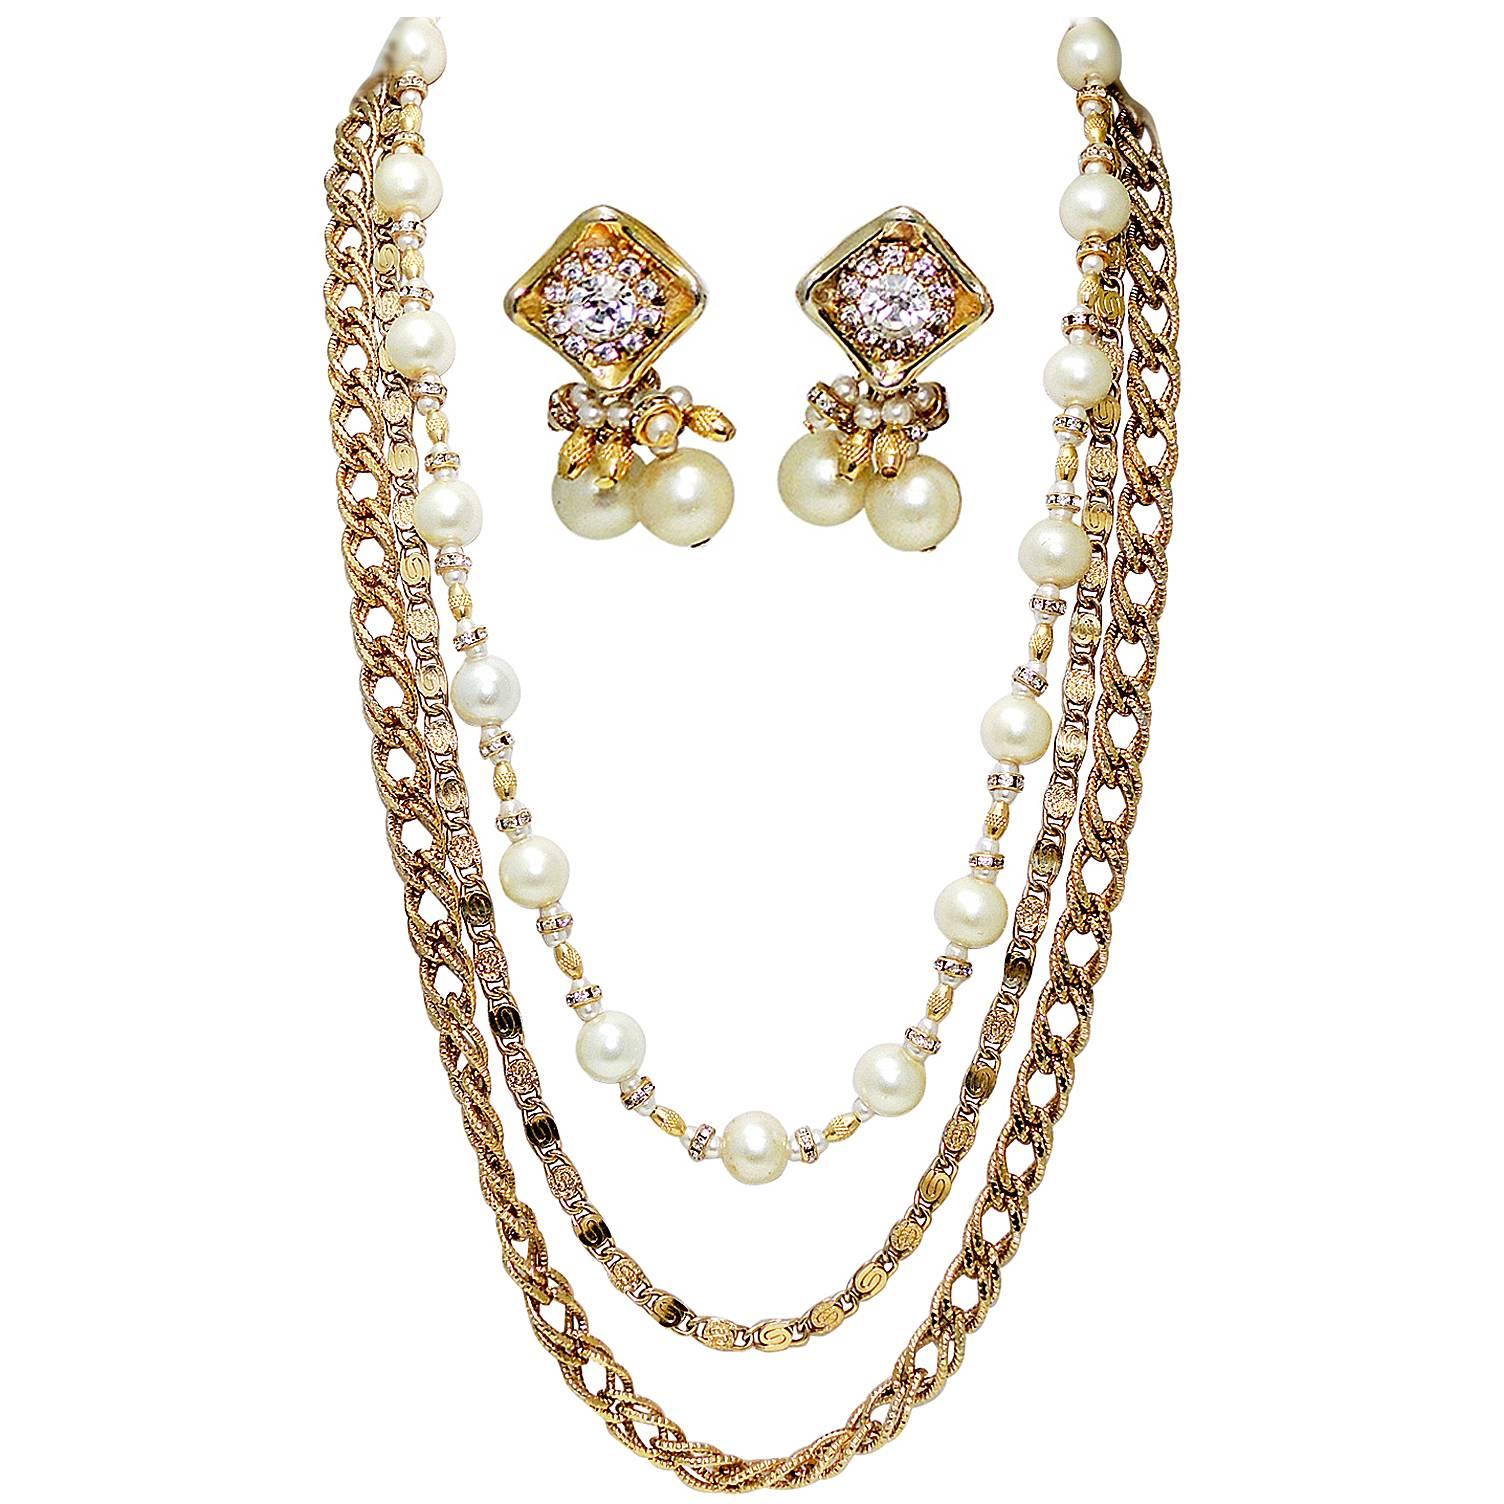 Vintage Trifari Three Strand Faux Pearl & Gold Tone Link Necklace & Earrings Set